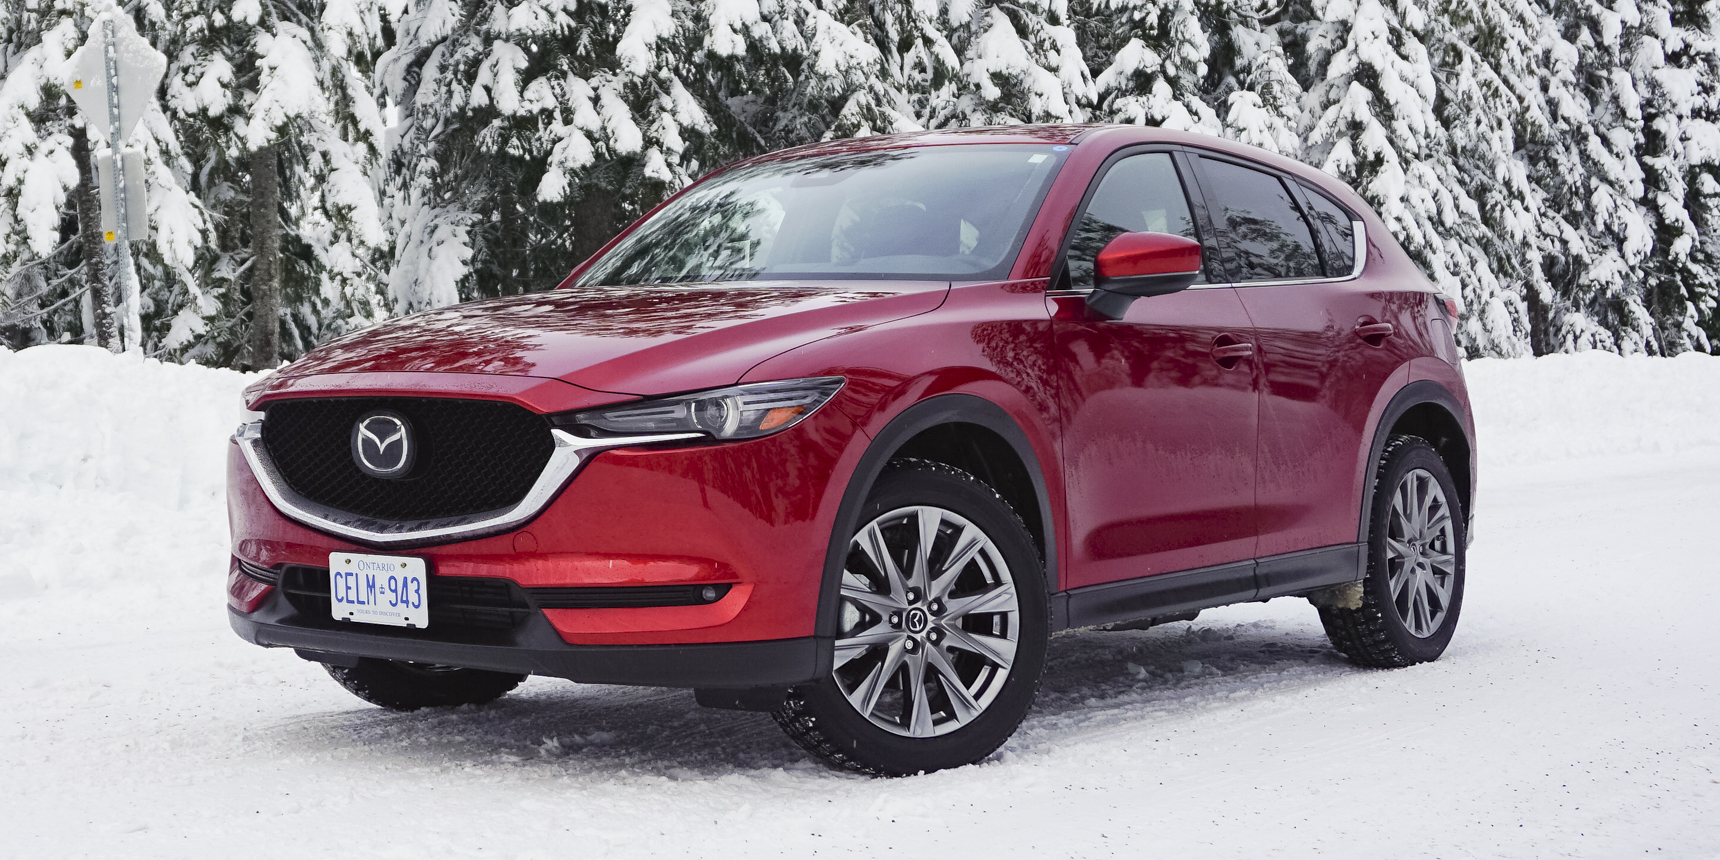 2019 Mazda CX-5 First Drive Review: A Turbo-Powered Turn Towards